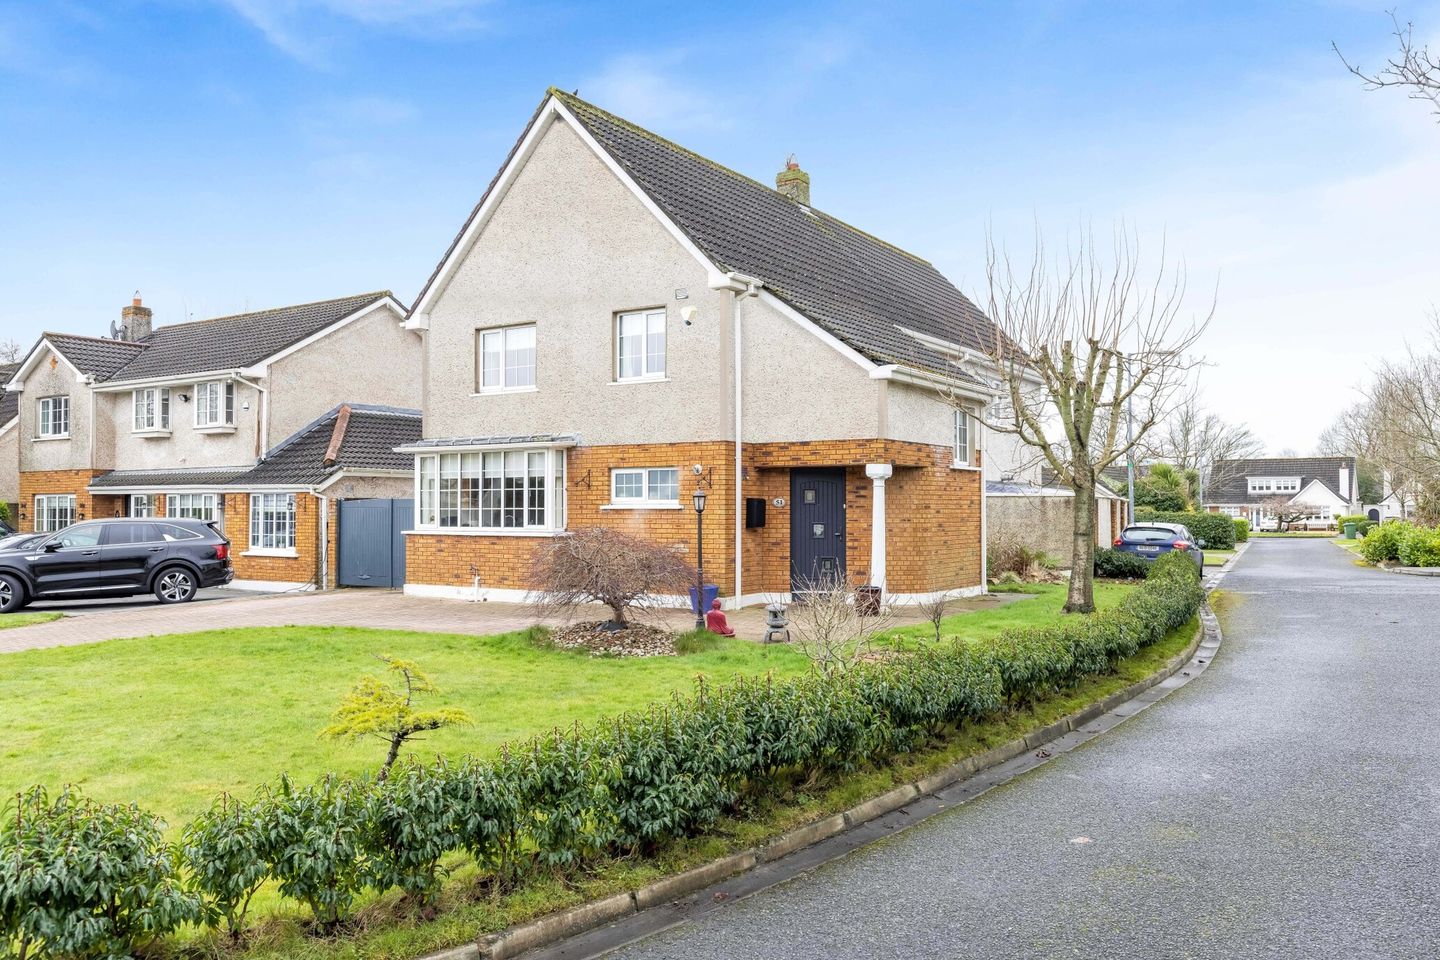 51 The Old Mill, Ratoath, Co Meath, A85X266